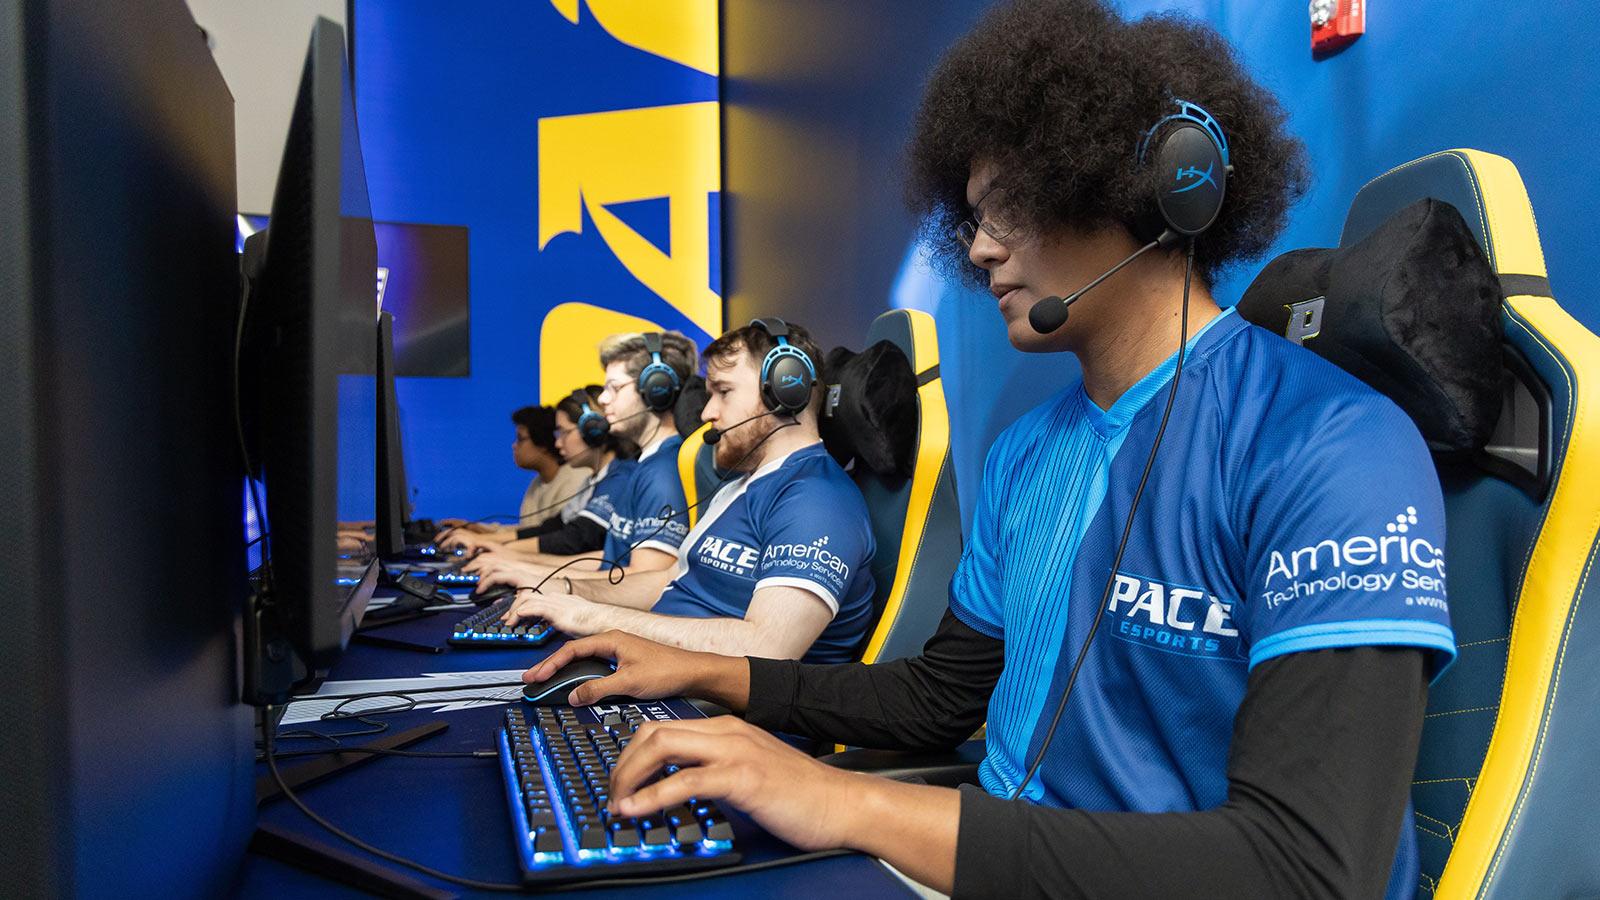 Pace Esports players use the gaming stations at the NYC arena